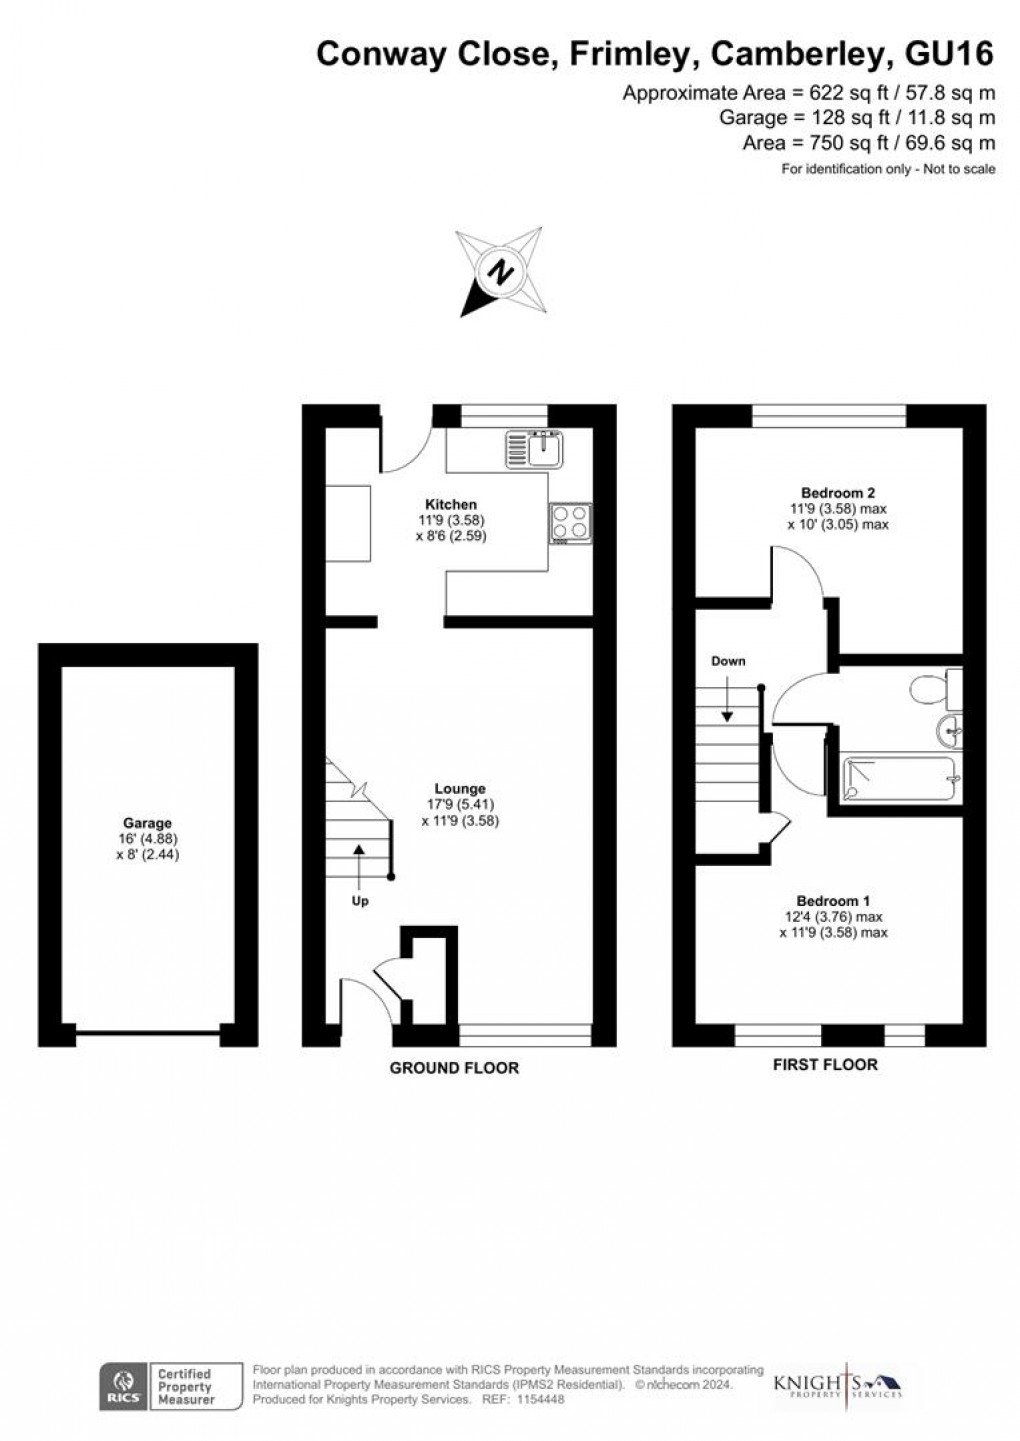 Floorplan for Conway Close, Frimley, Camberley